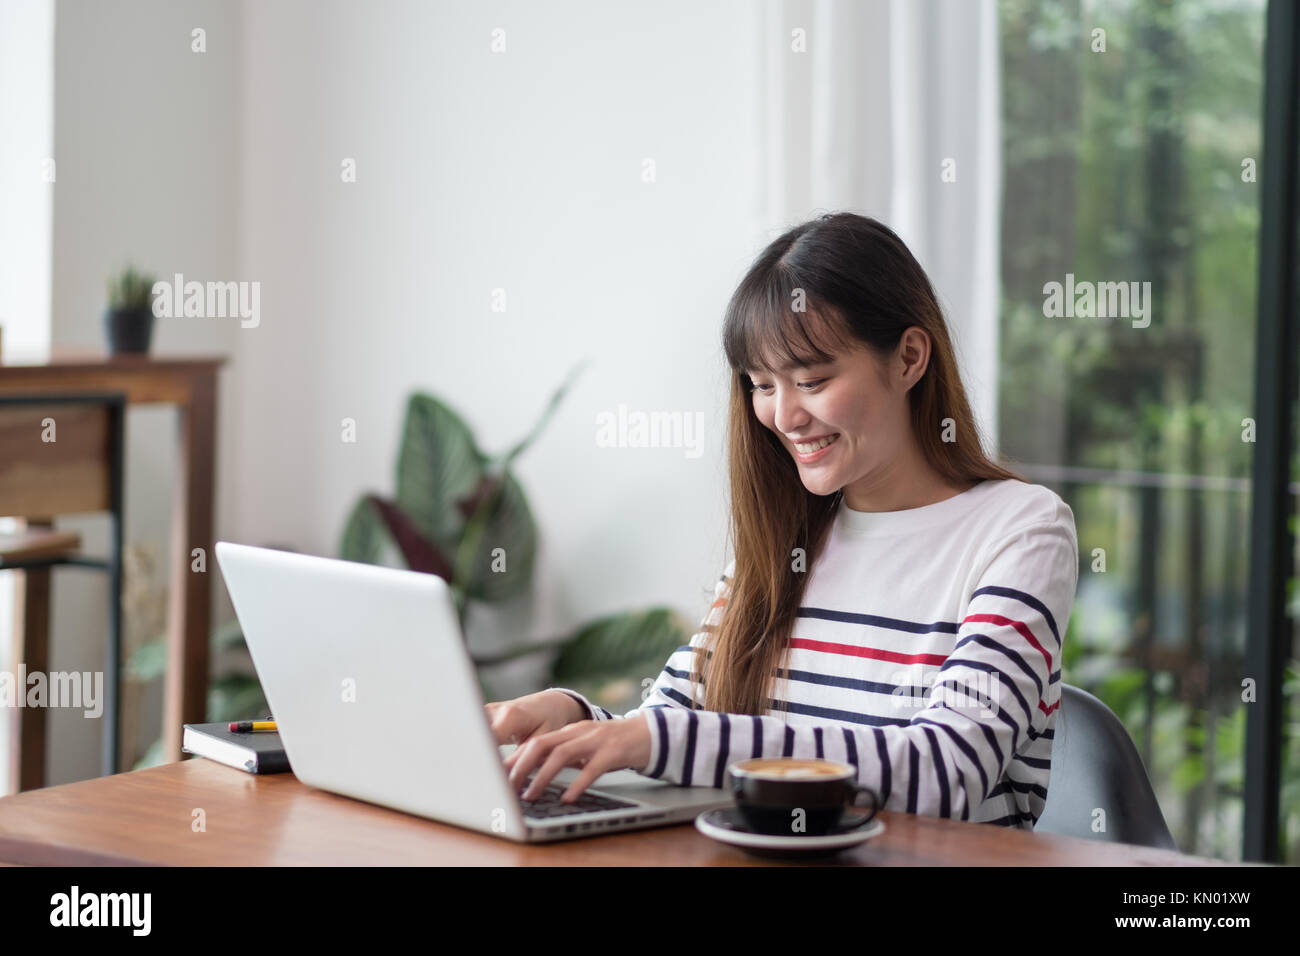 Asian woman using on laptop computer near window at cafe restaurant,Digital age lifestyle,using Technolgy  concept,co working space Stock Photo